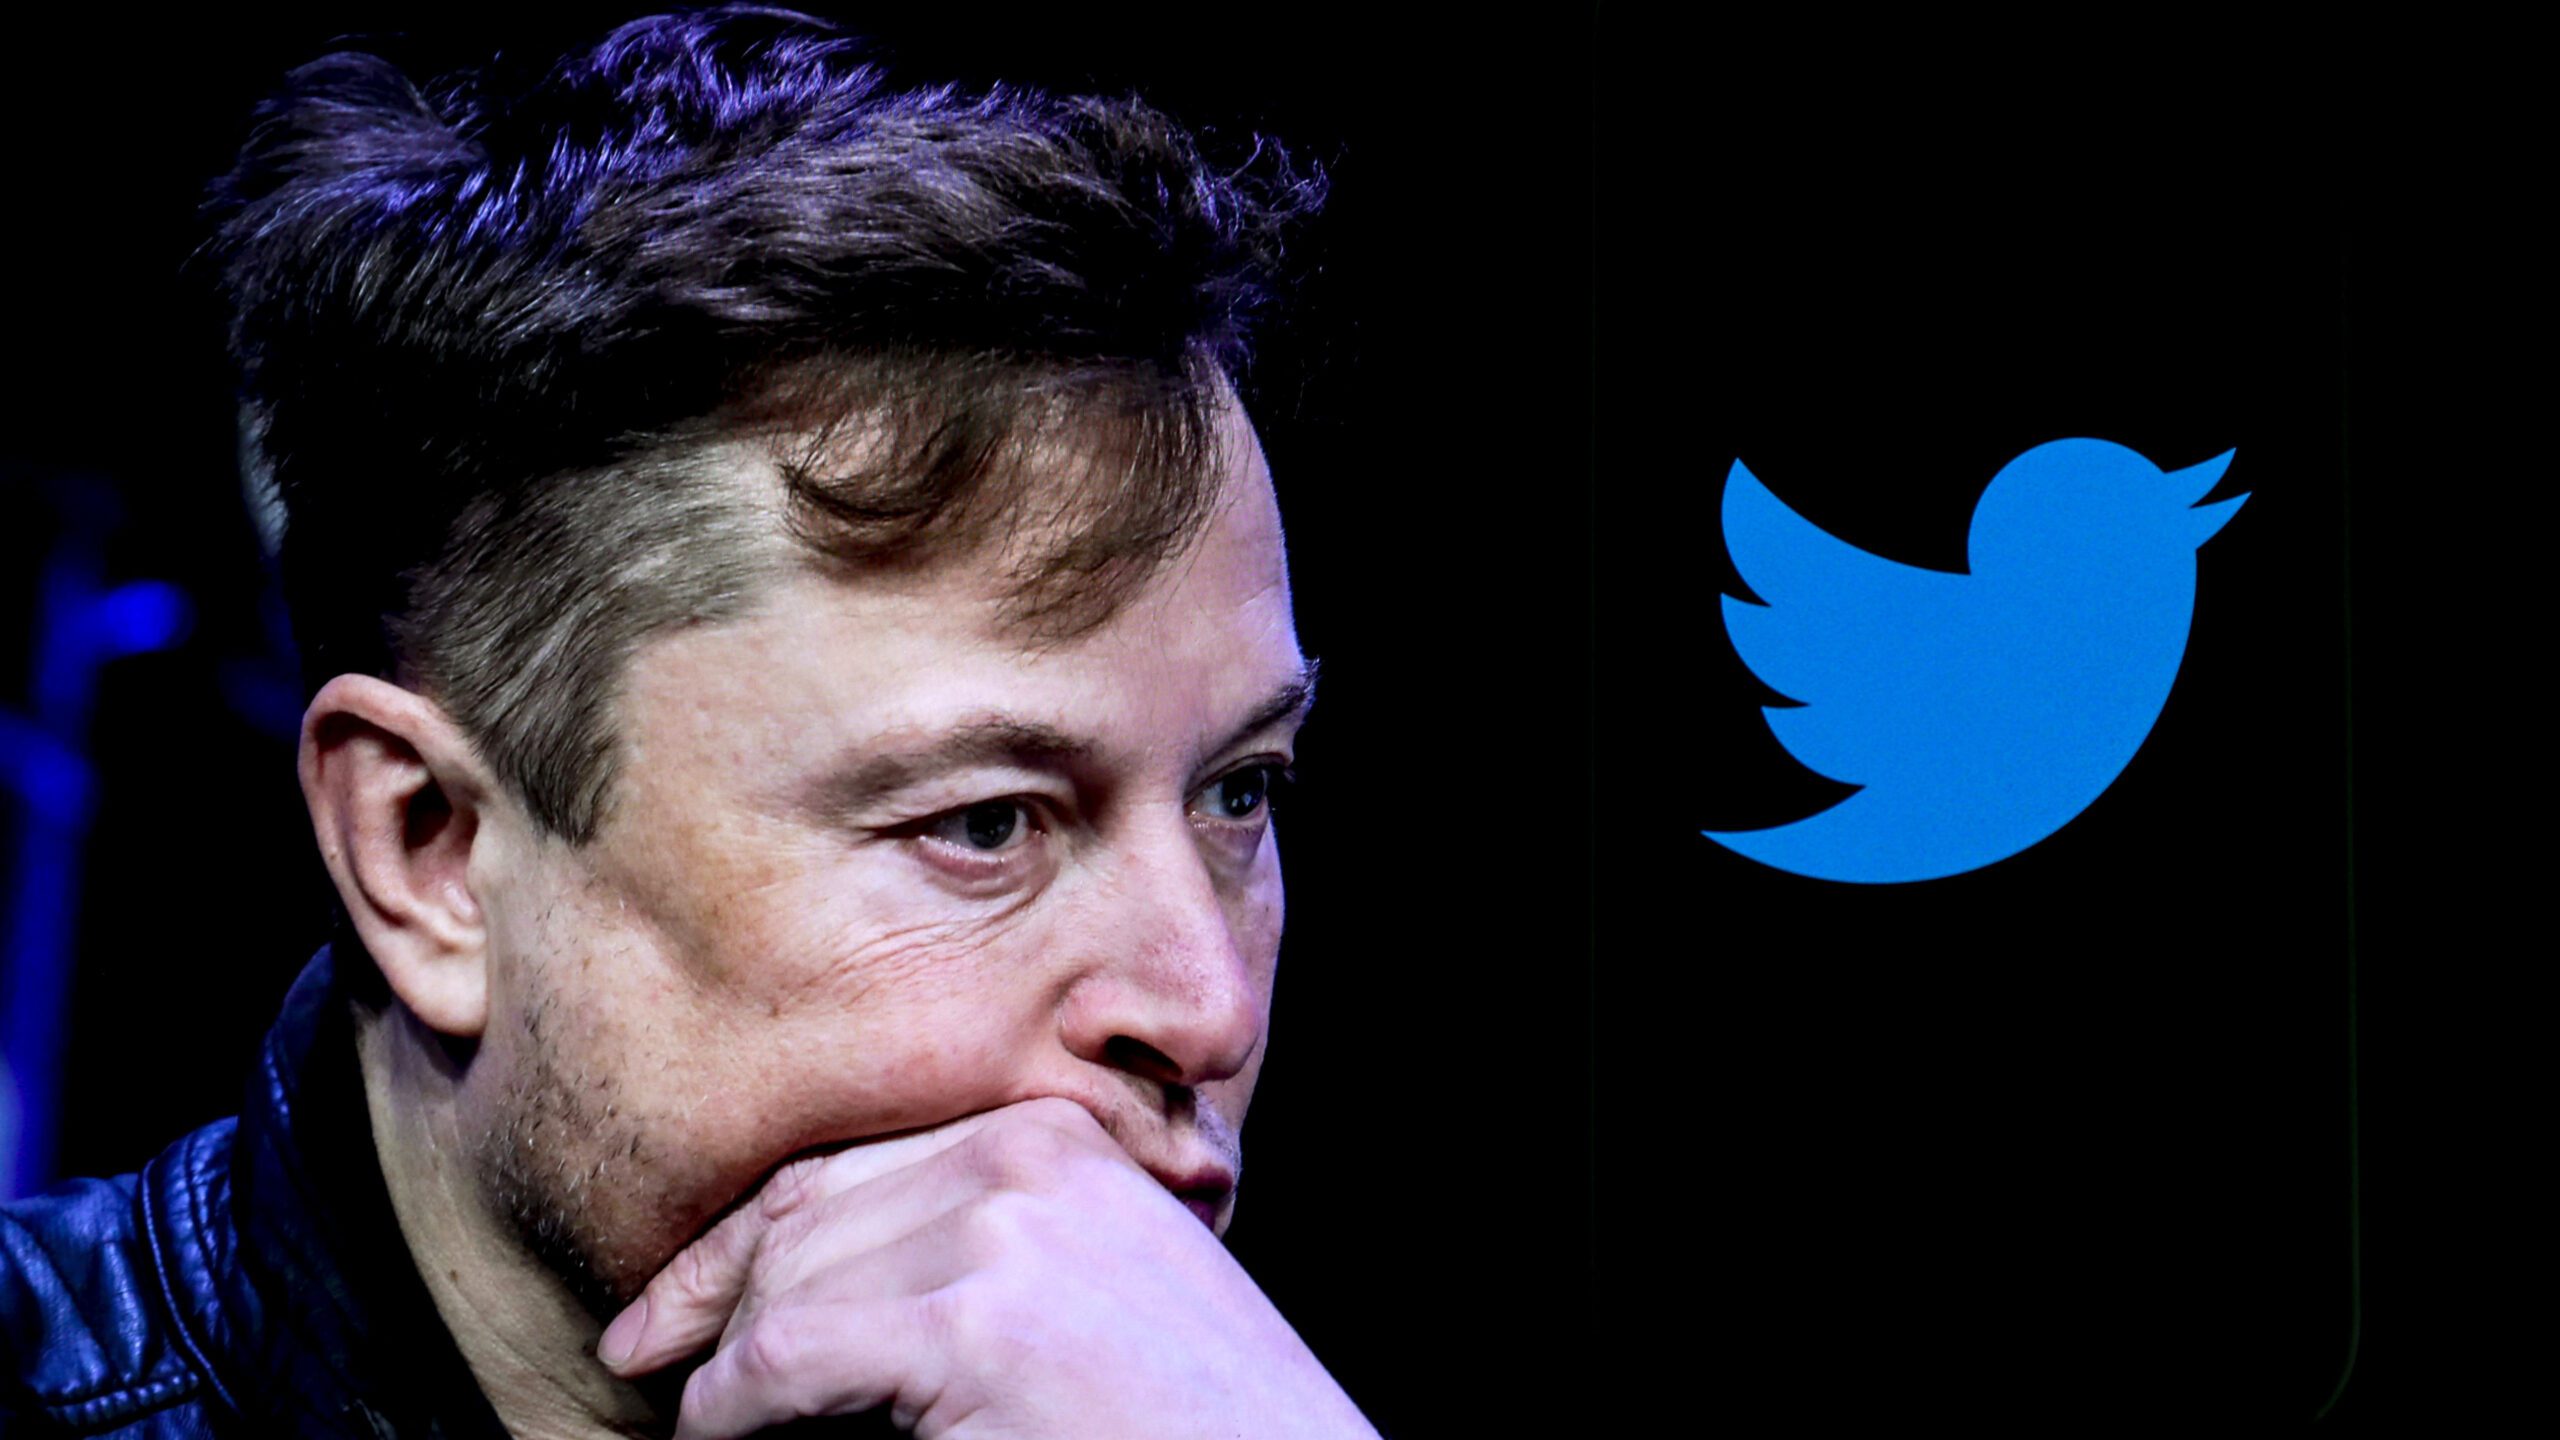 elon-musk-introduces-new-idea-to-twitter-and-kills-it-hours-later